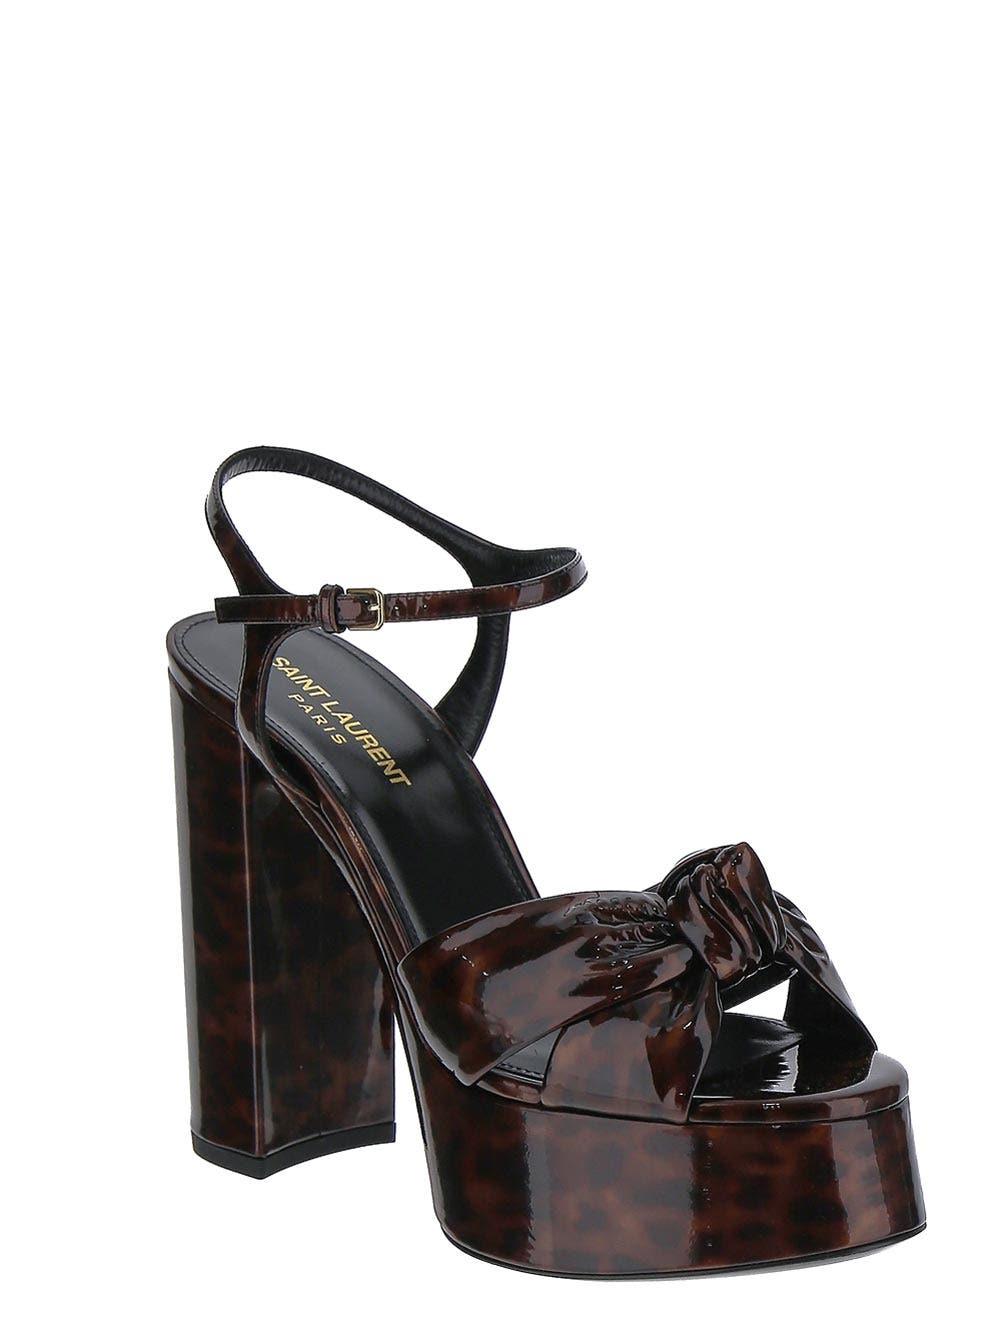 Saint Laurent Bianca Sandals In Tortoiseshell Patent Leather in Brown | Lyst